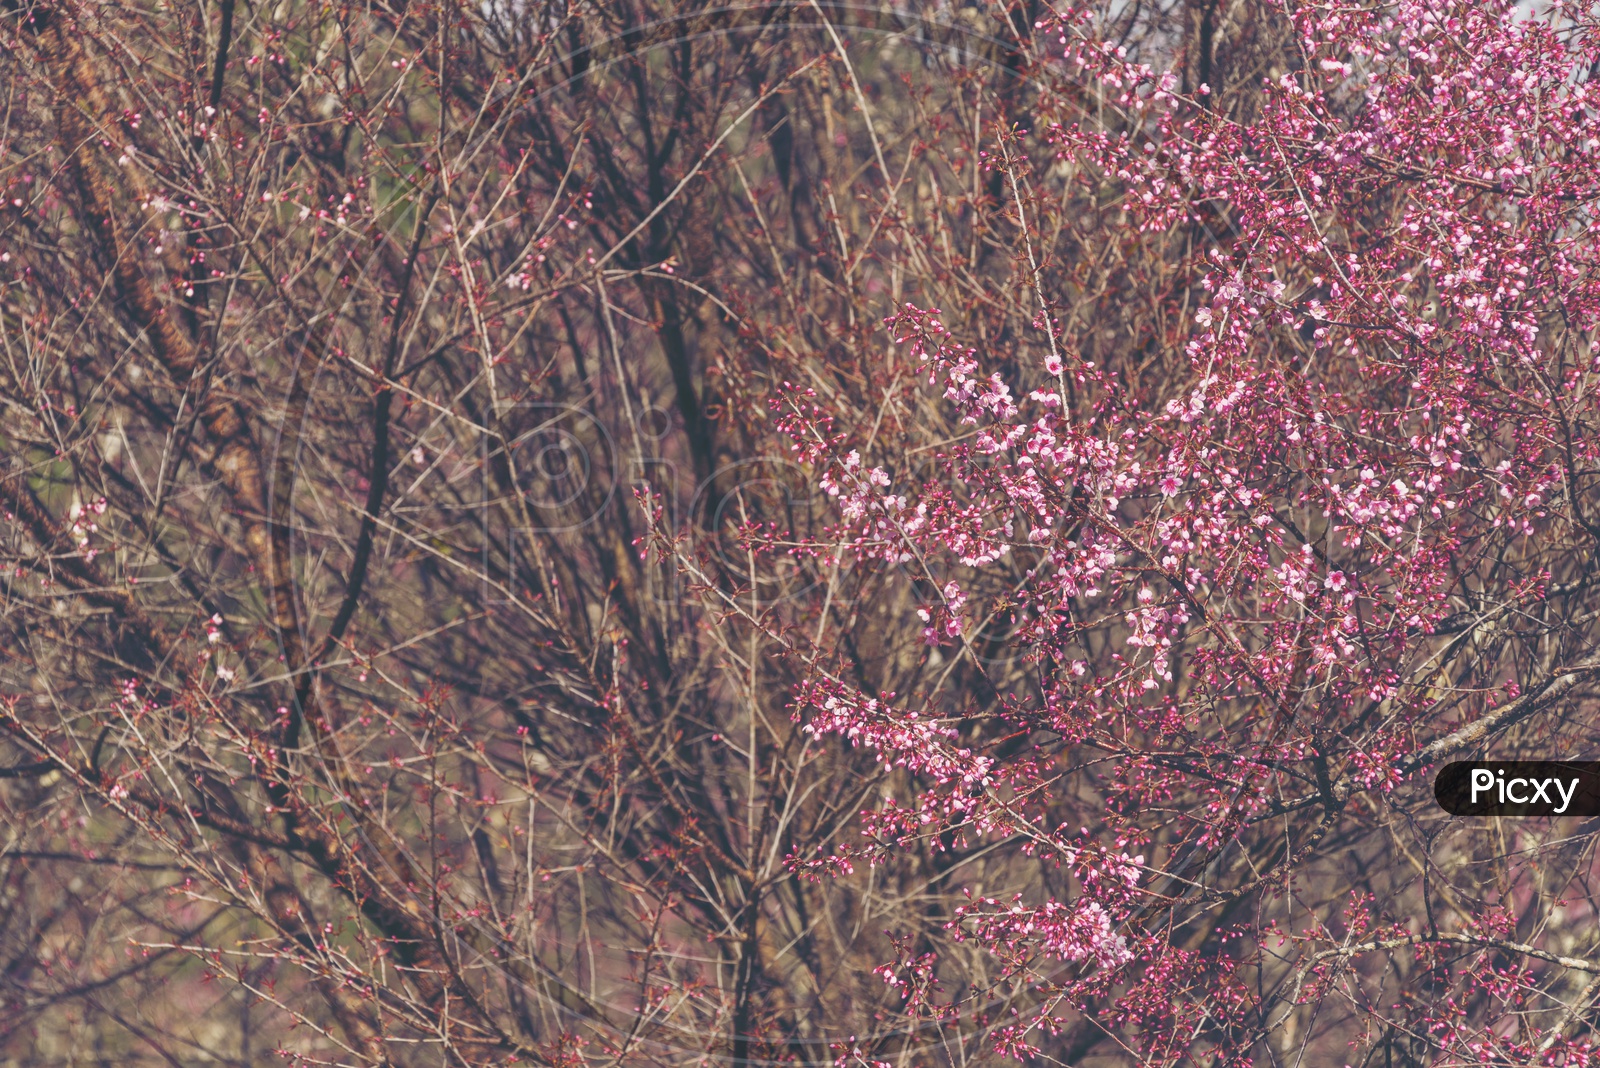 Peach tree with pink flowers